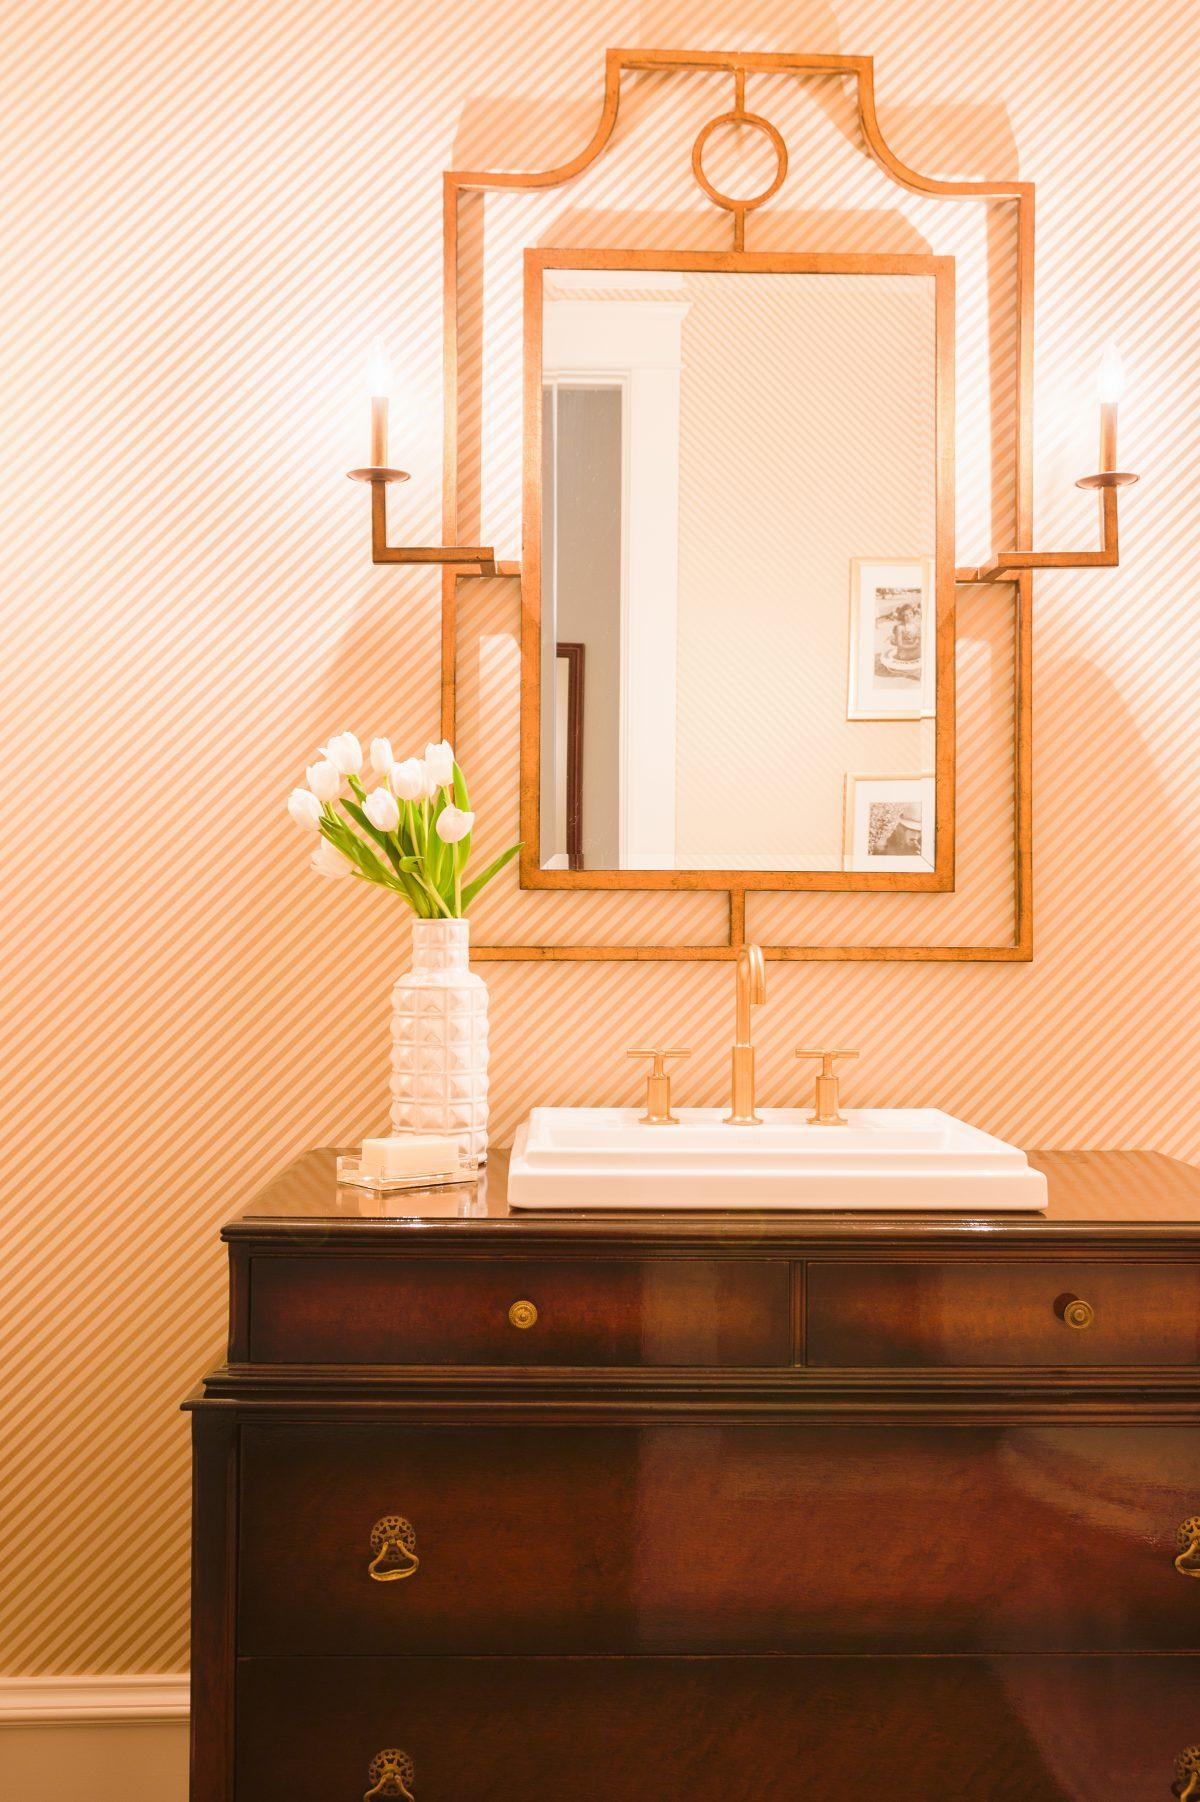 A vintage dresser that wasn't needed in a bedroom was converted into a bathroom vanity in this powder room designed by Laura Burleson Interiors. (Alyssa Rosenheck/Laura Burleson Interiors via AP)